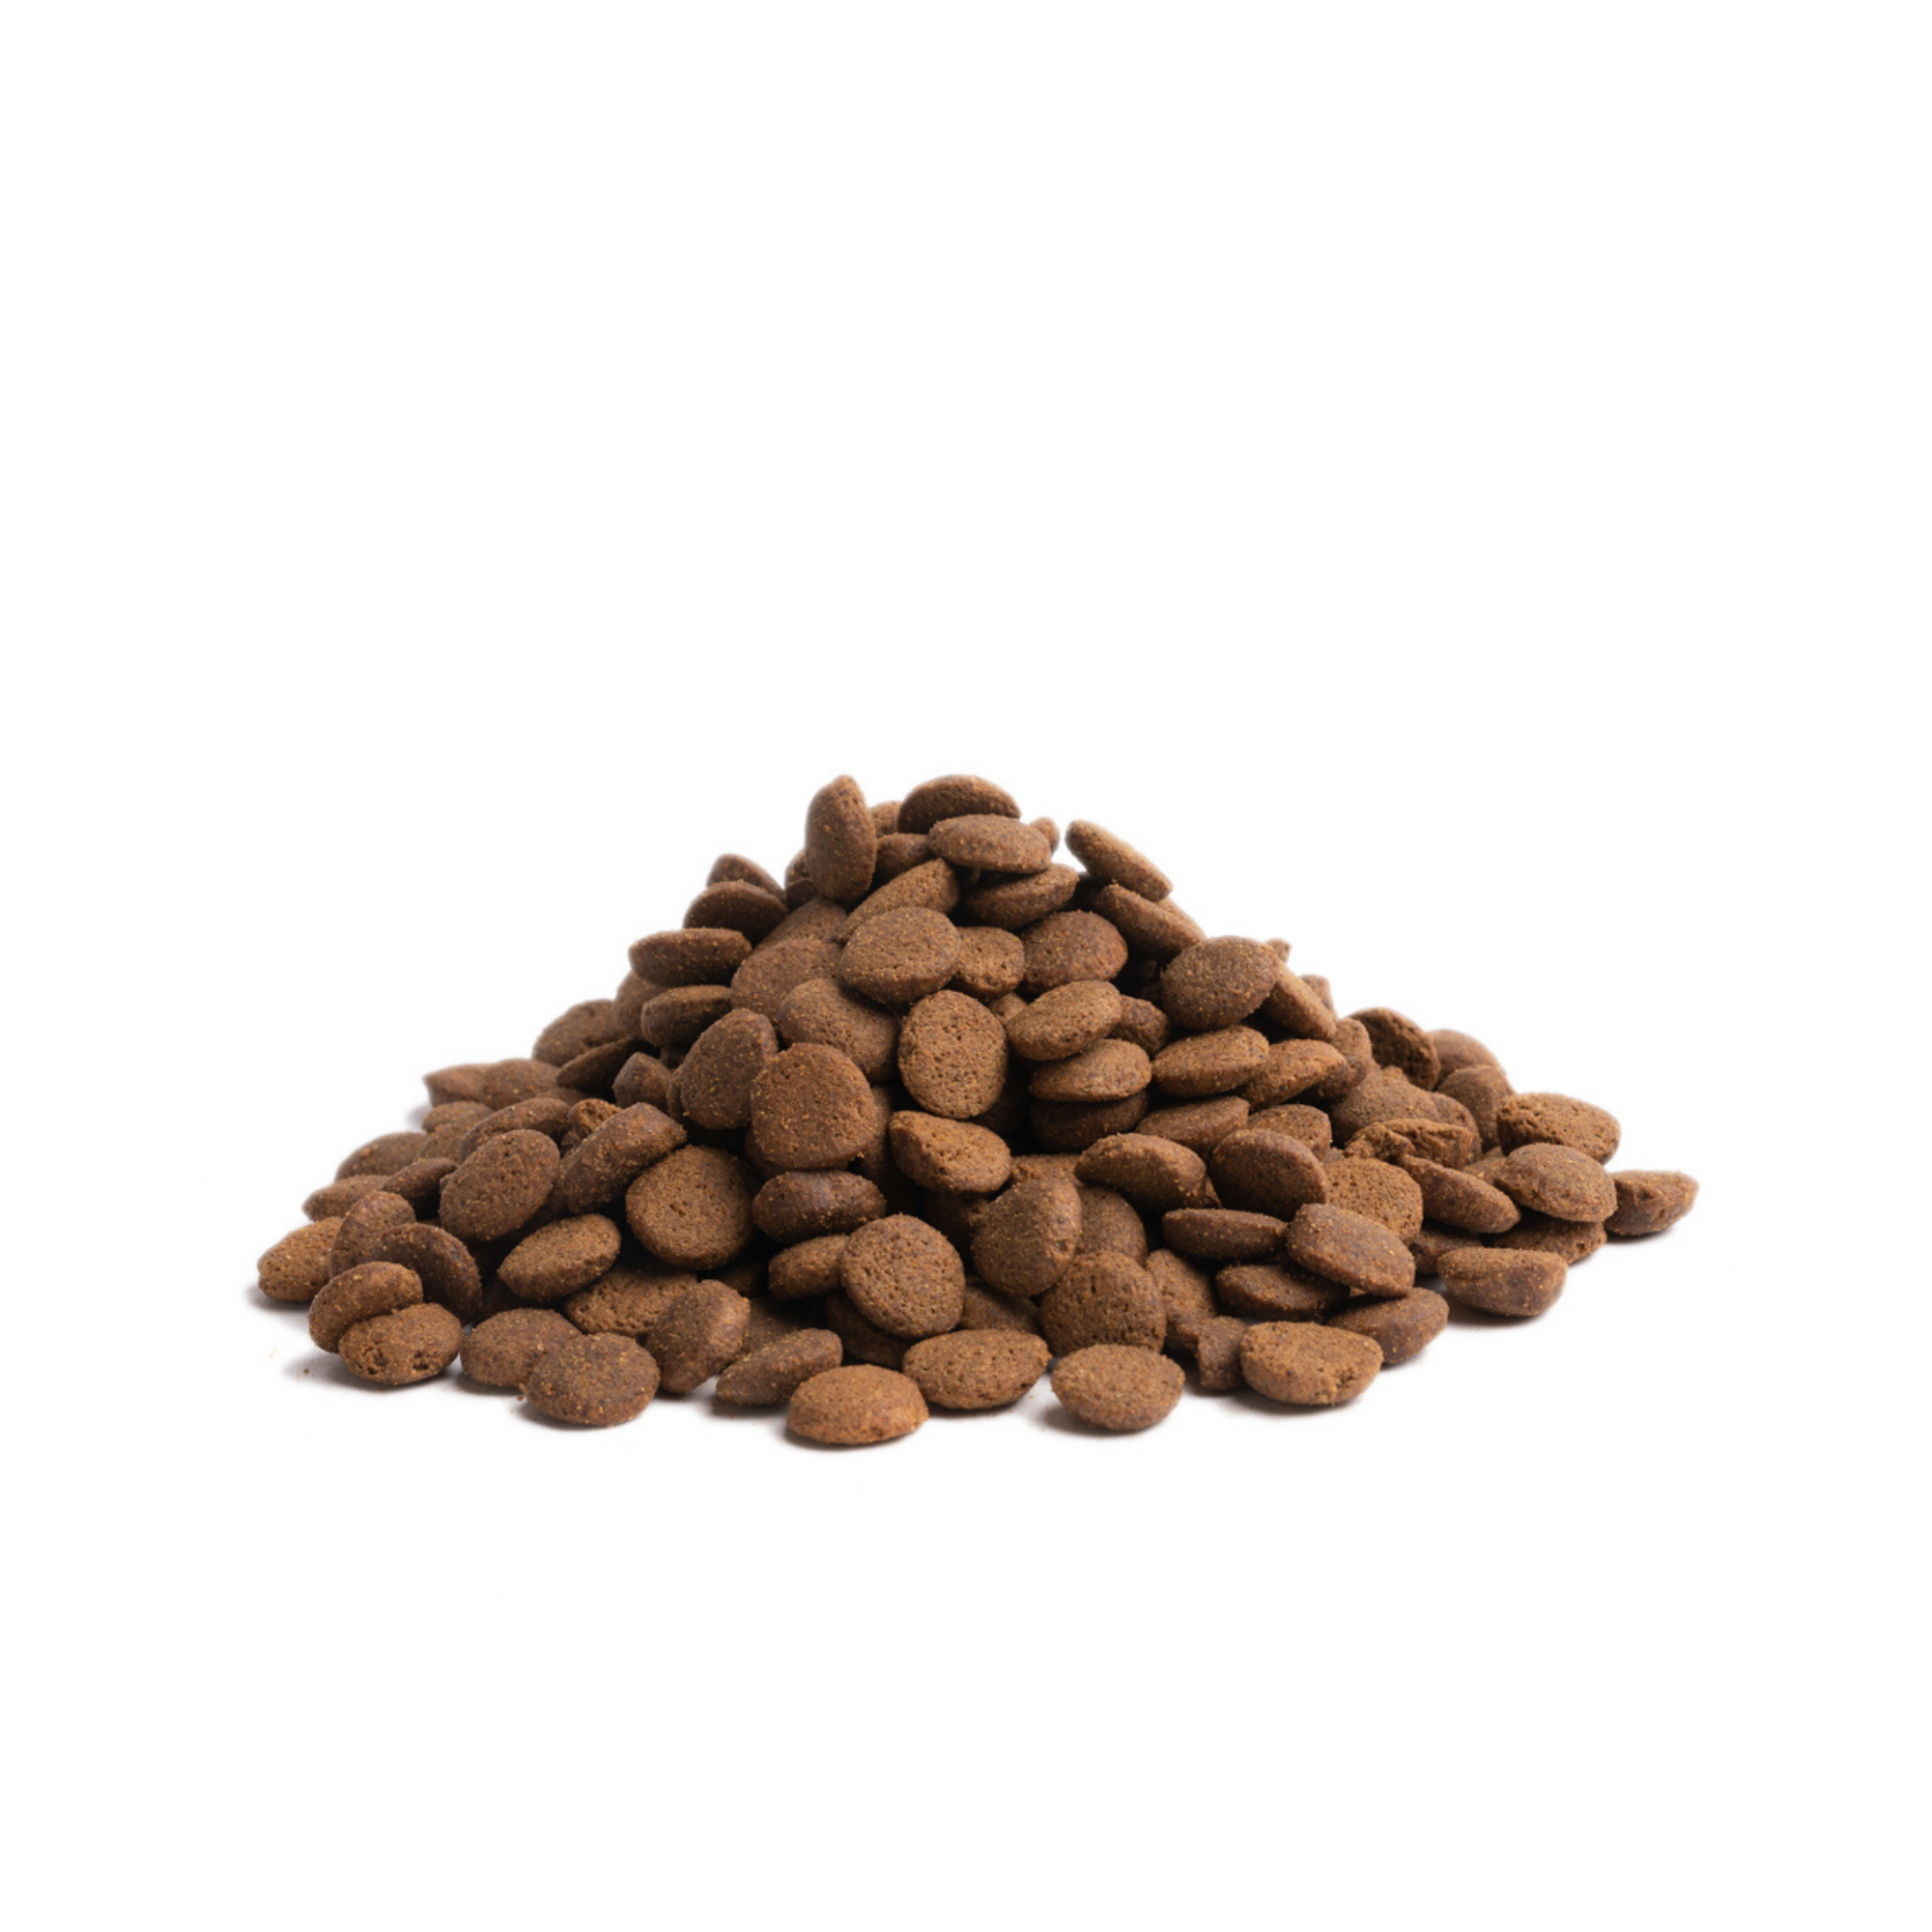 79% meat Norfolk turkey, Angus beef, irbe, pigeon, duck, salmon, eggs Super premium grainless feed for adult dogs weighing over 15kg HIGHLAND LIVING